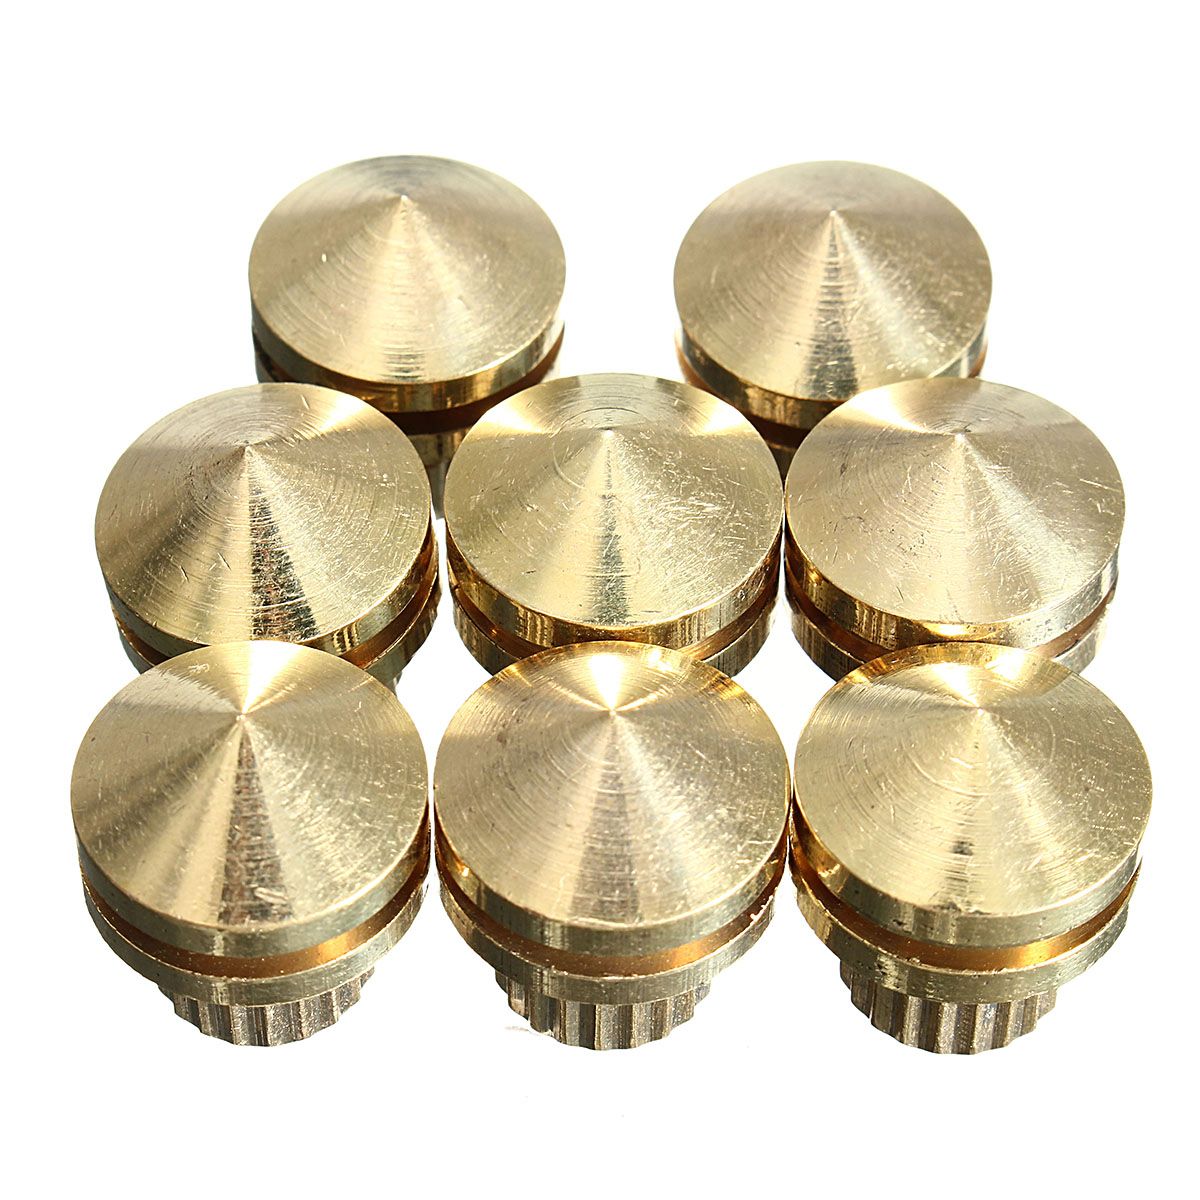 8pcs-HIFI-M8-Copper-Speaker-Suspension-Spikes-Isolation-Stands-Feet-Pads-Base-1352039